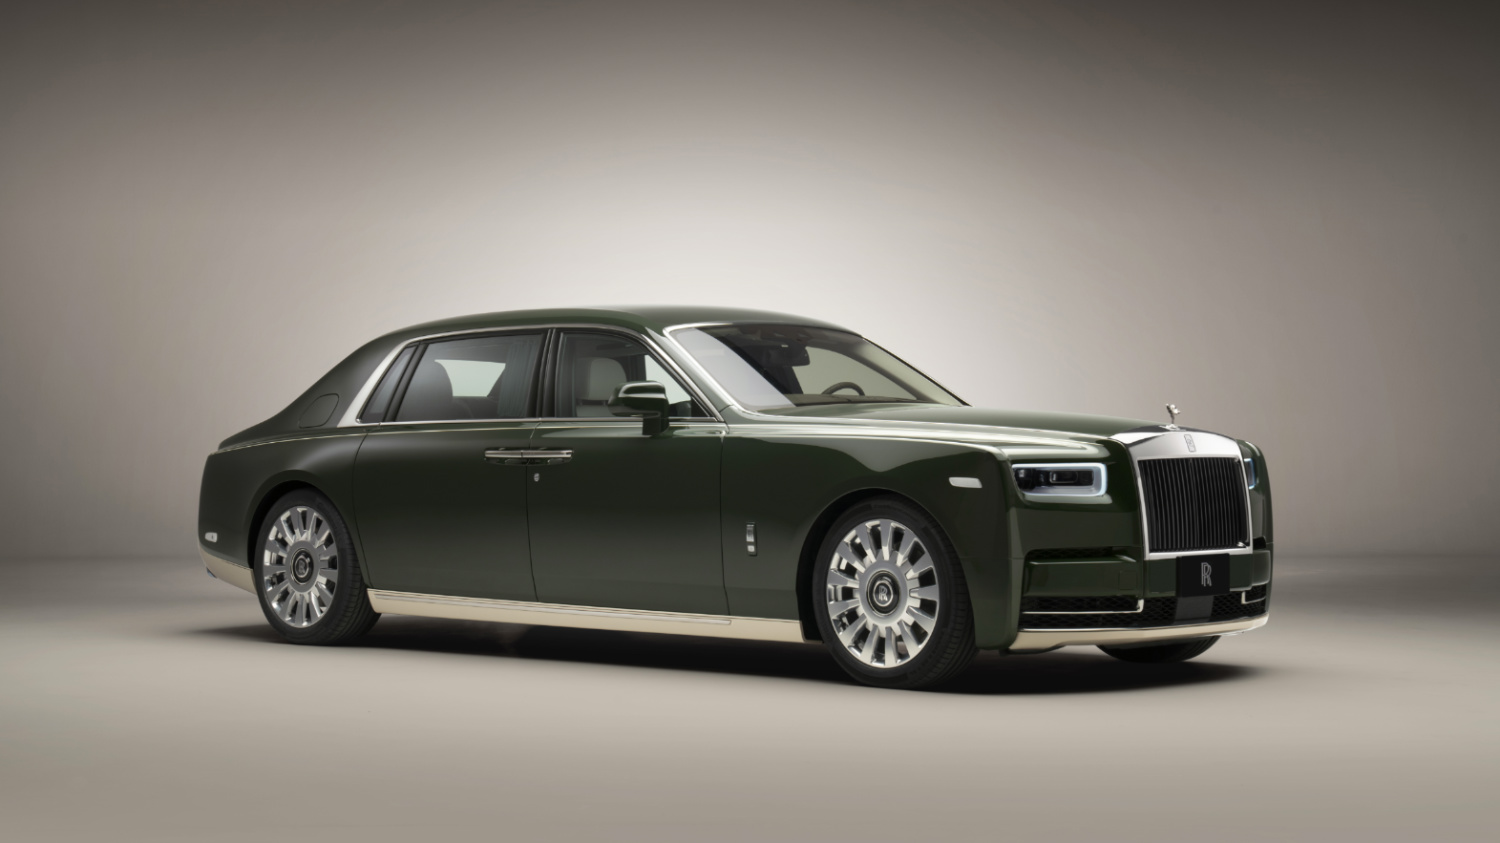 RollsRoyce to keep Goodwood factory at core of business  Autocar